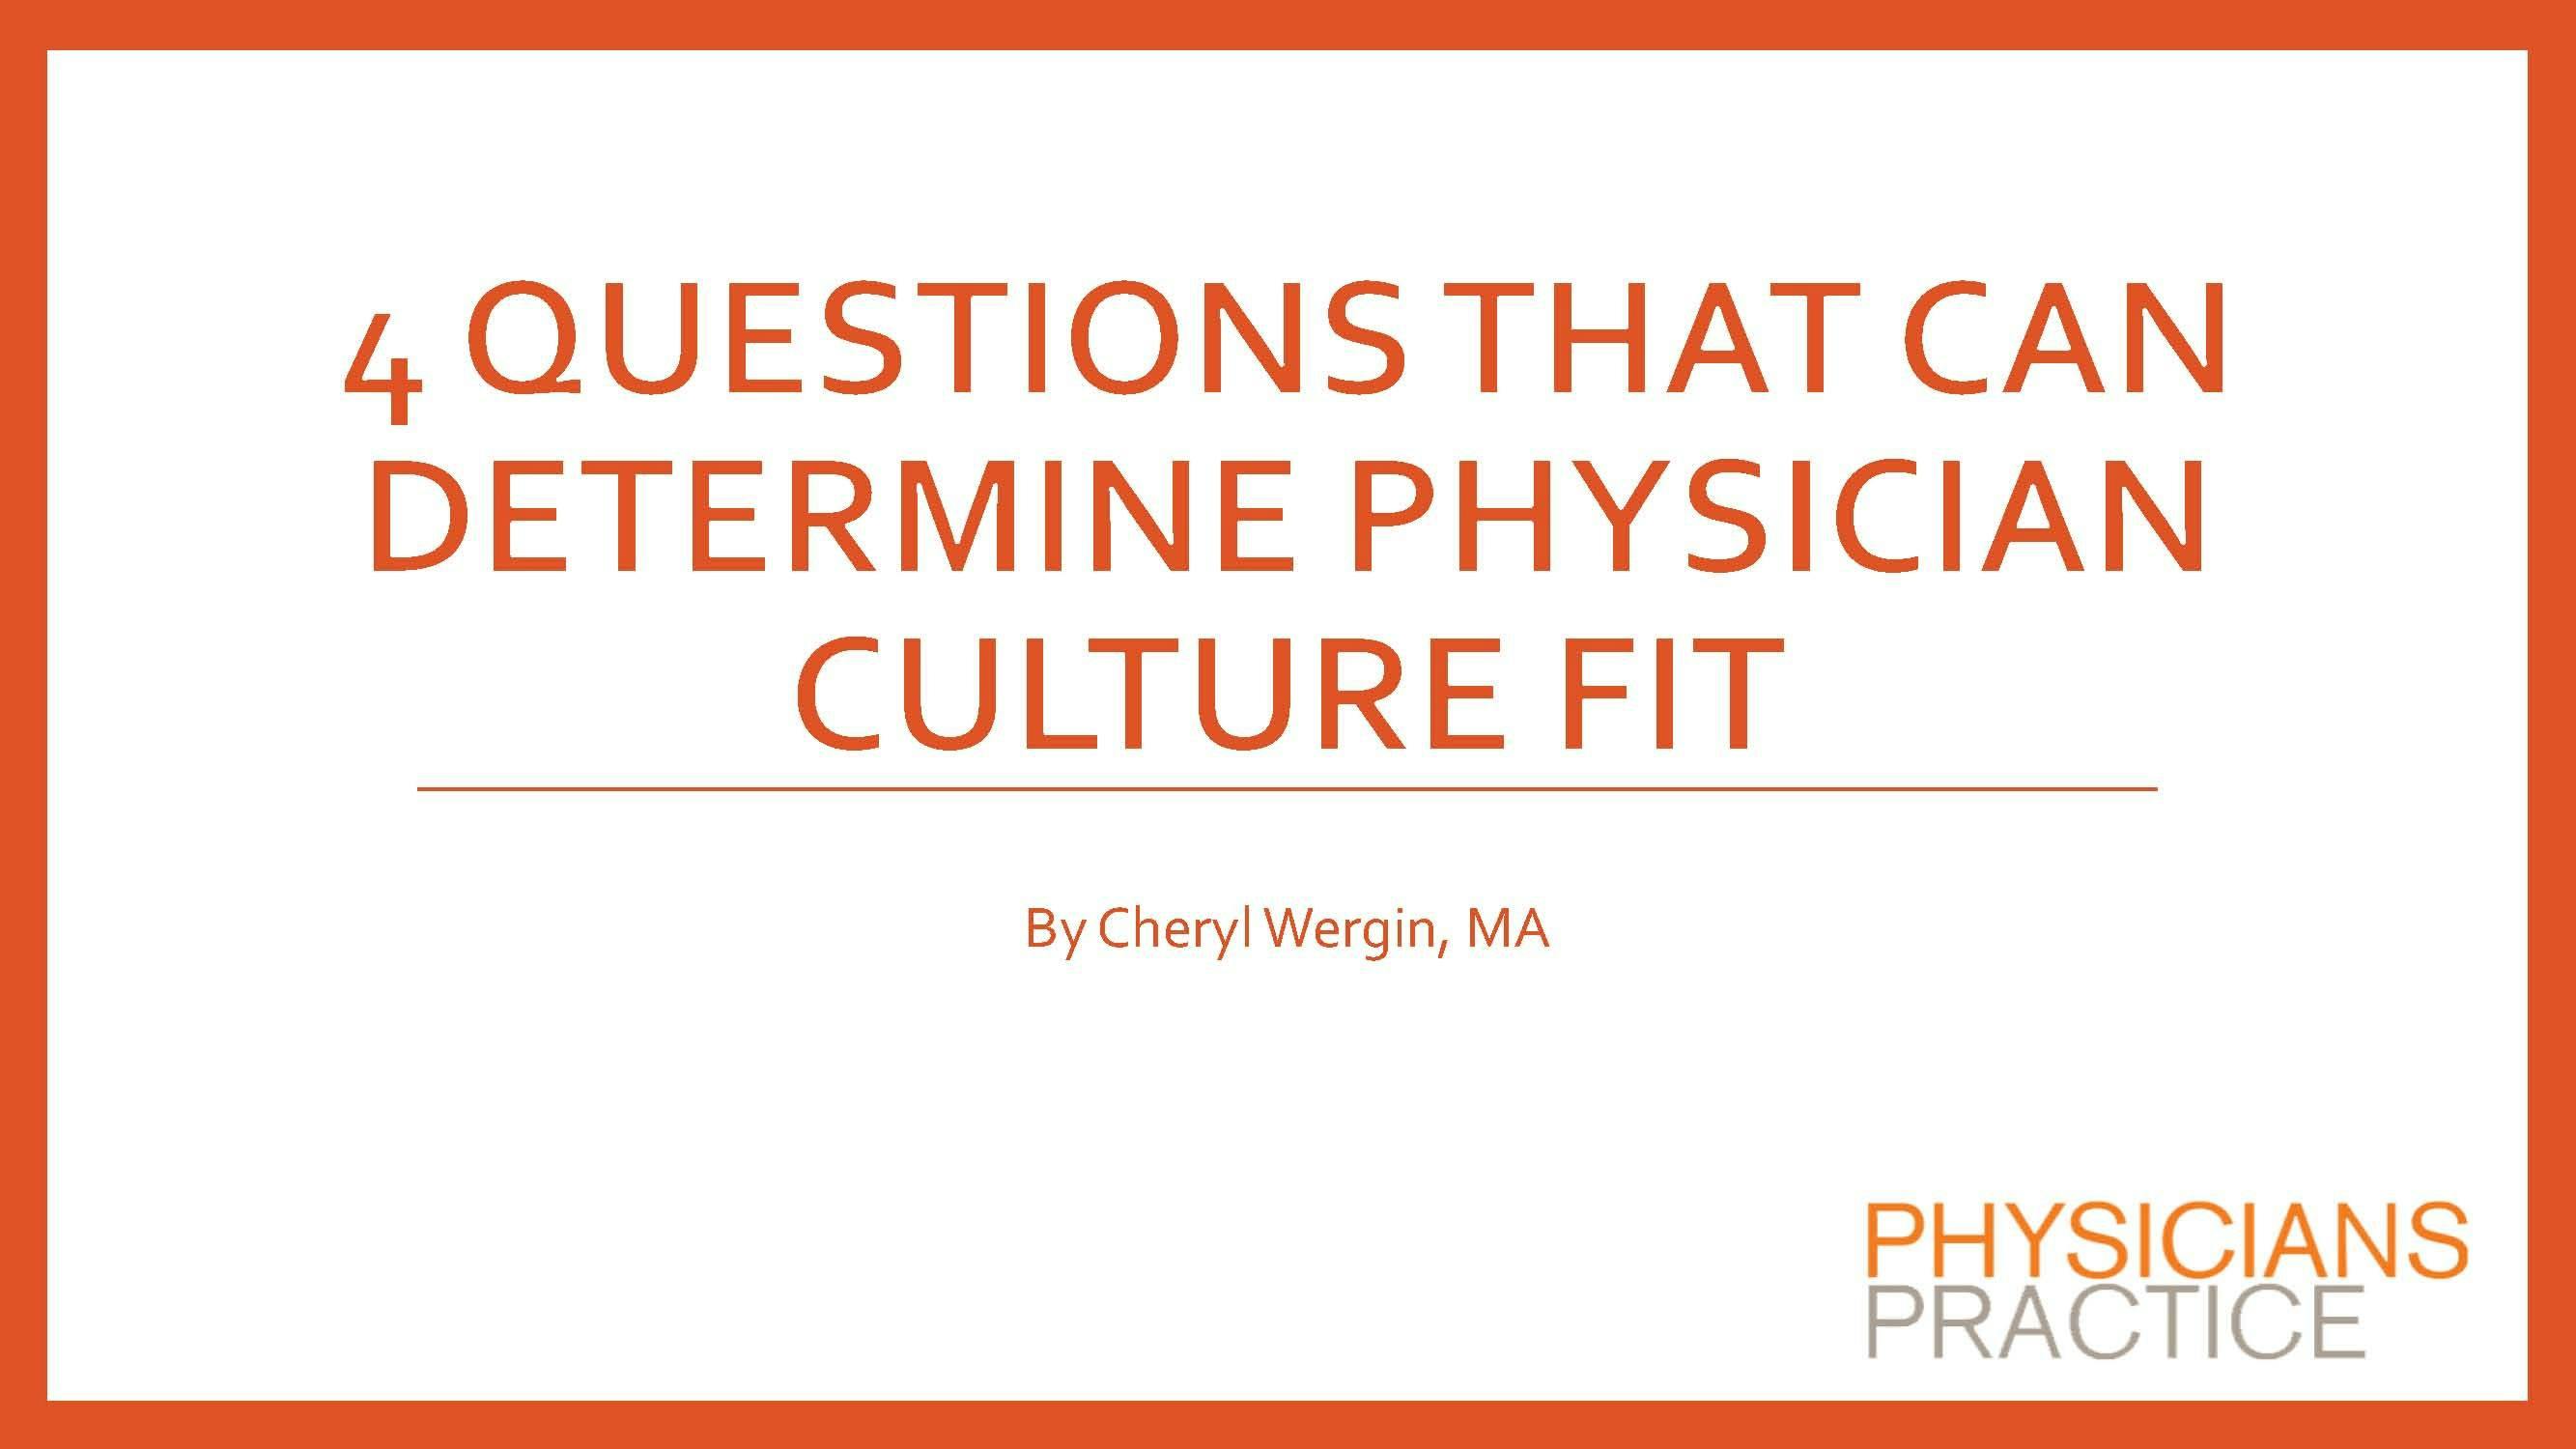 4 Questions That Can Determine Physician Culture Fit